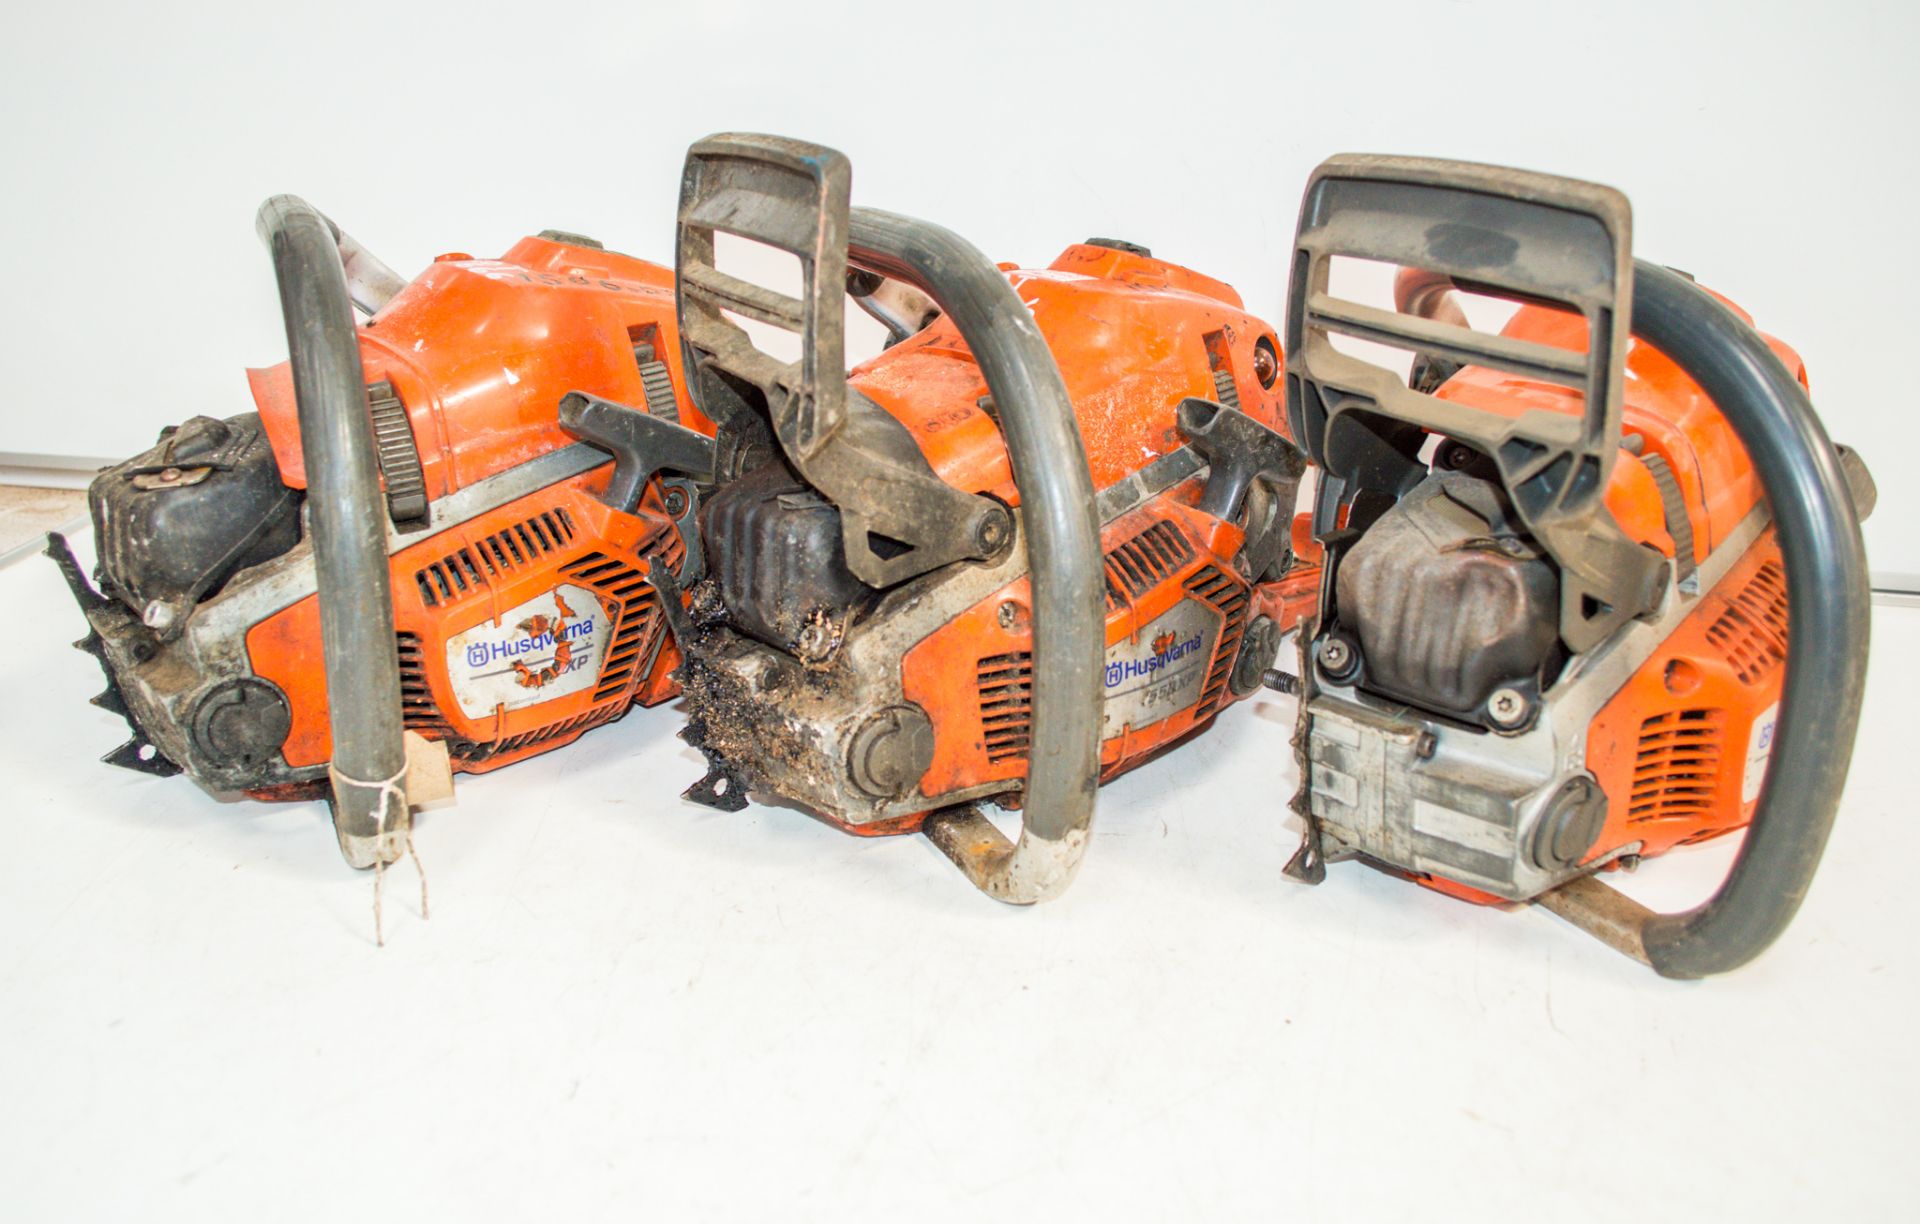 3 - Husqvarna petrol driven chainsaw 15051261/15060716/1903-0153 ** All with no bars or chains **